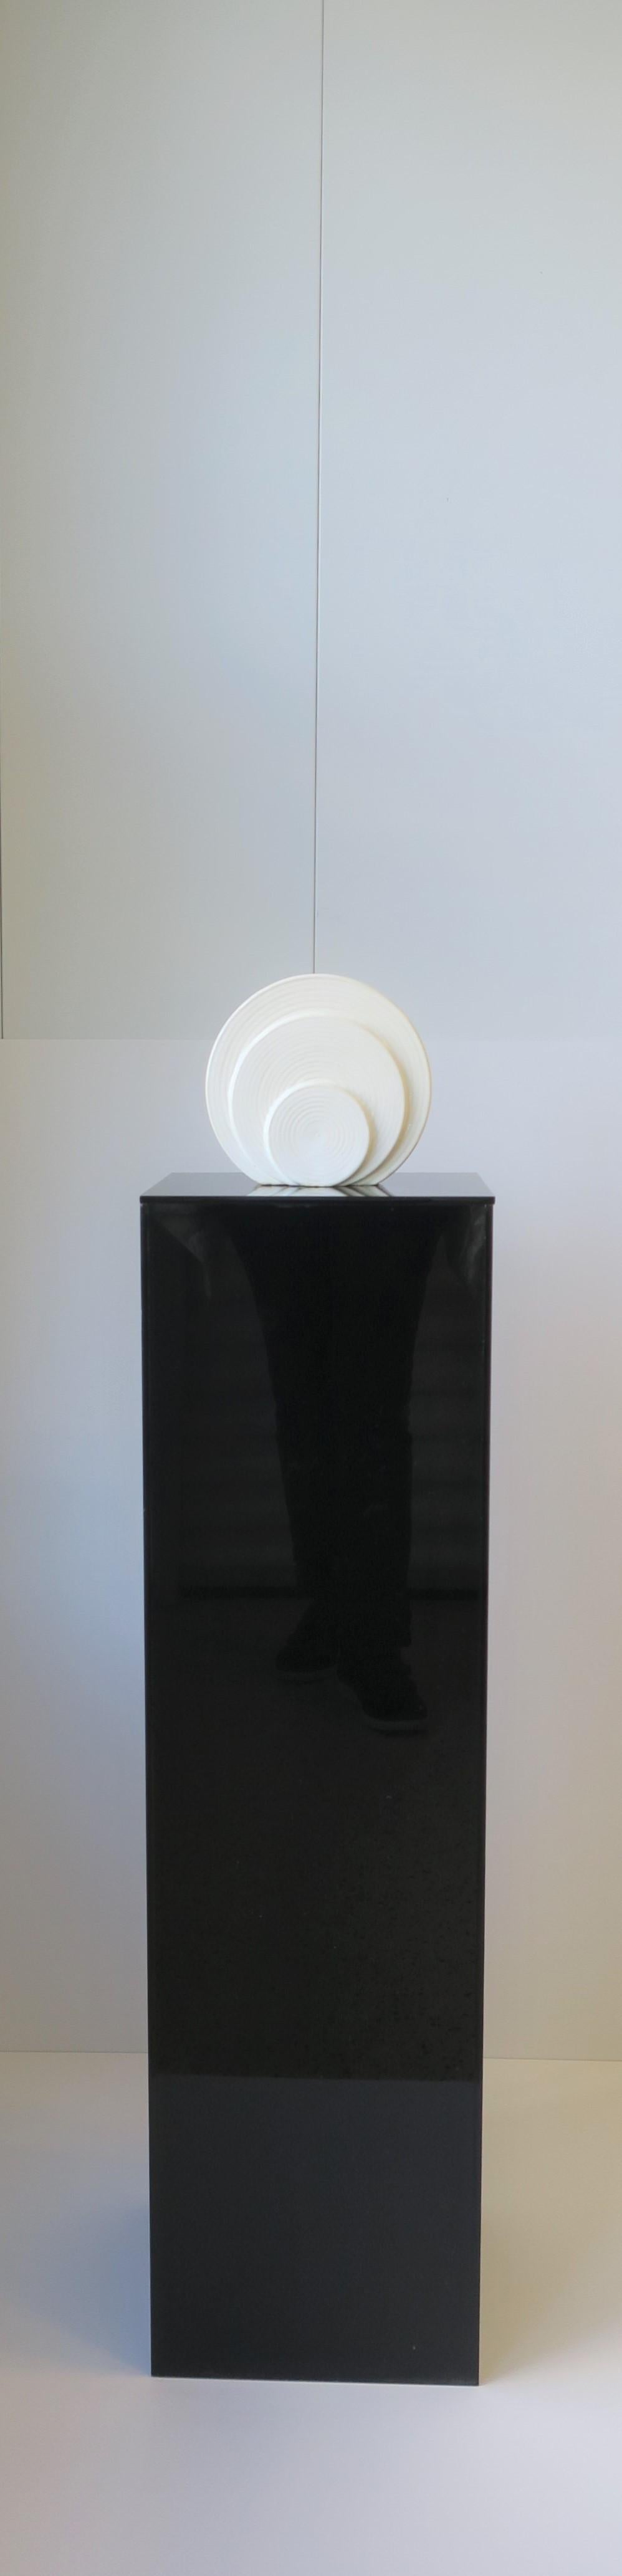 Japanese Modern White Pottery Vase, Japan, Early 20th c For Sale 2